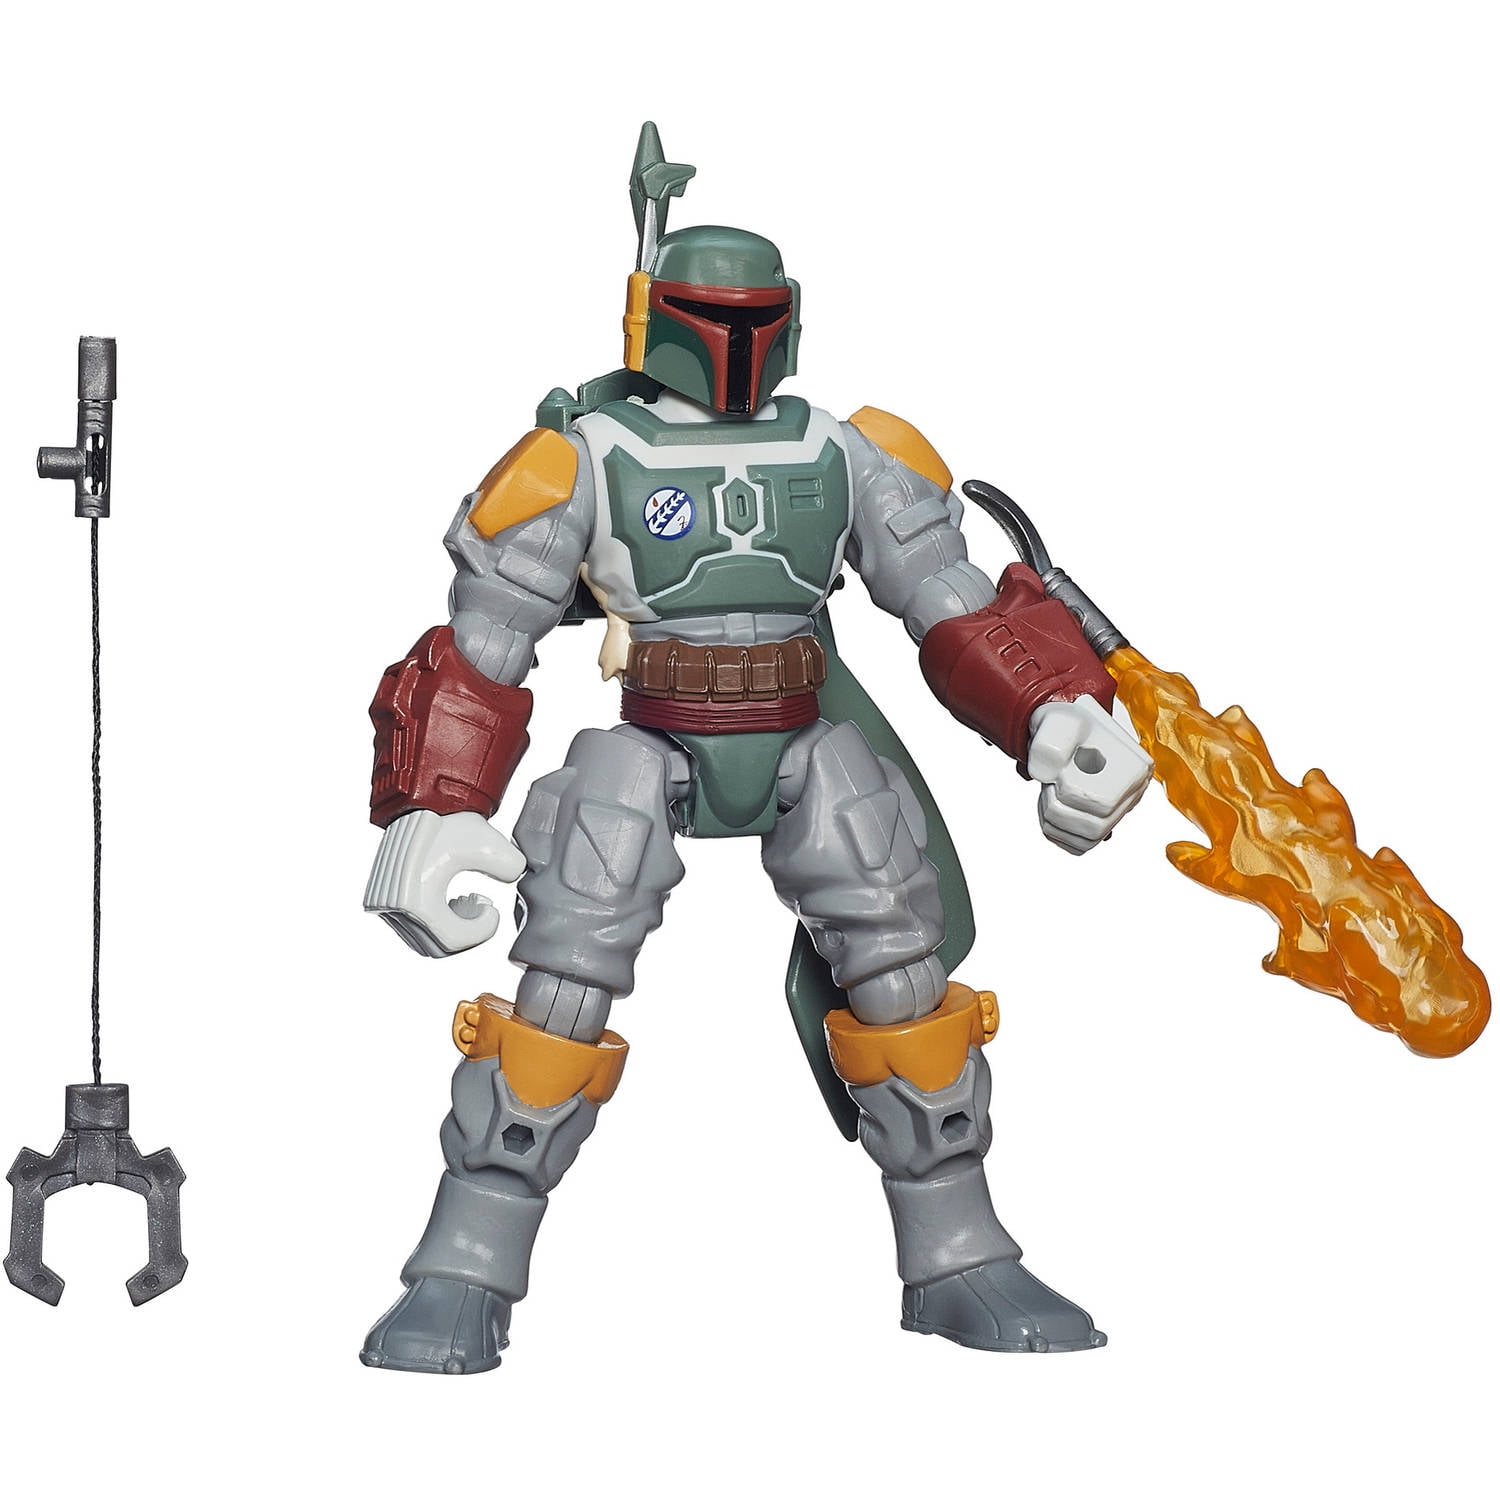 Hasbro Star Wars Han Solo & Boba Fett Force Link 2-Pack 3.75" Action w/weapons 